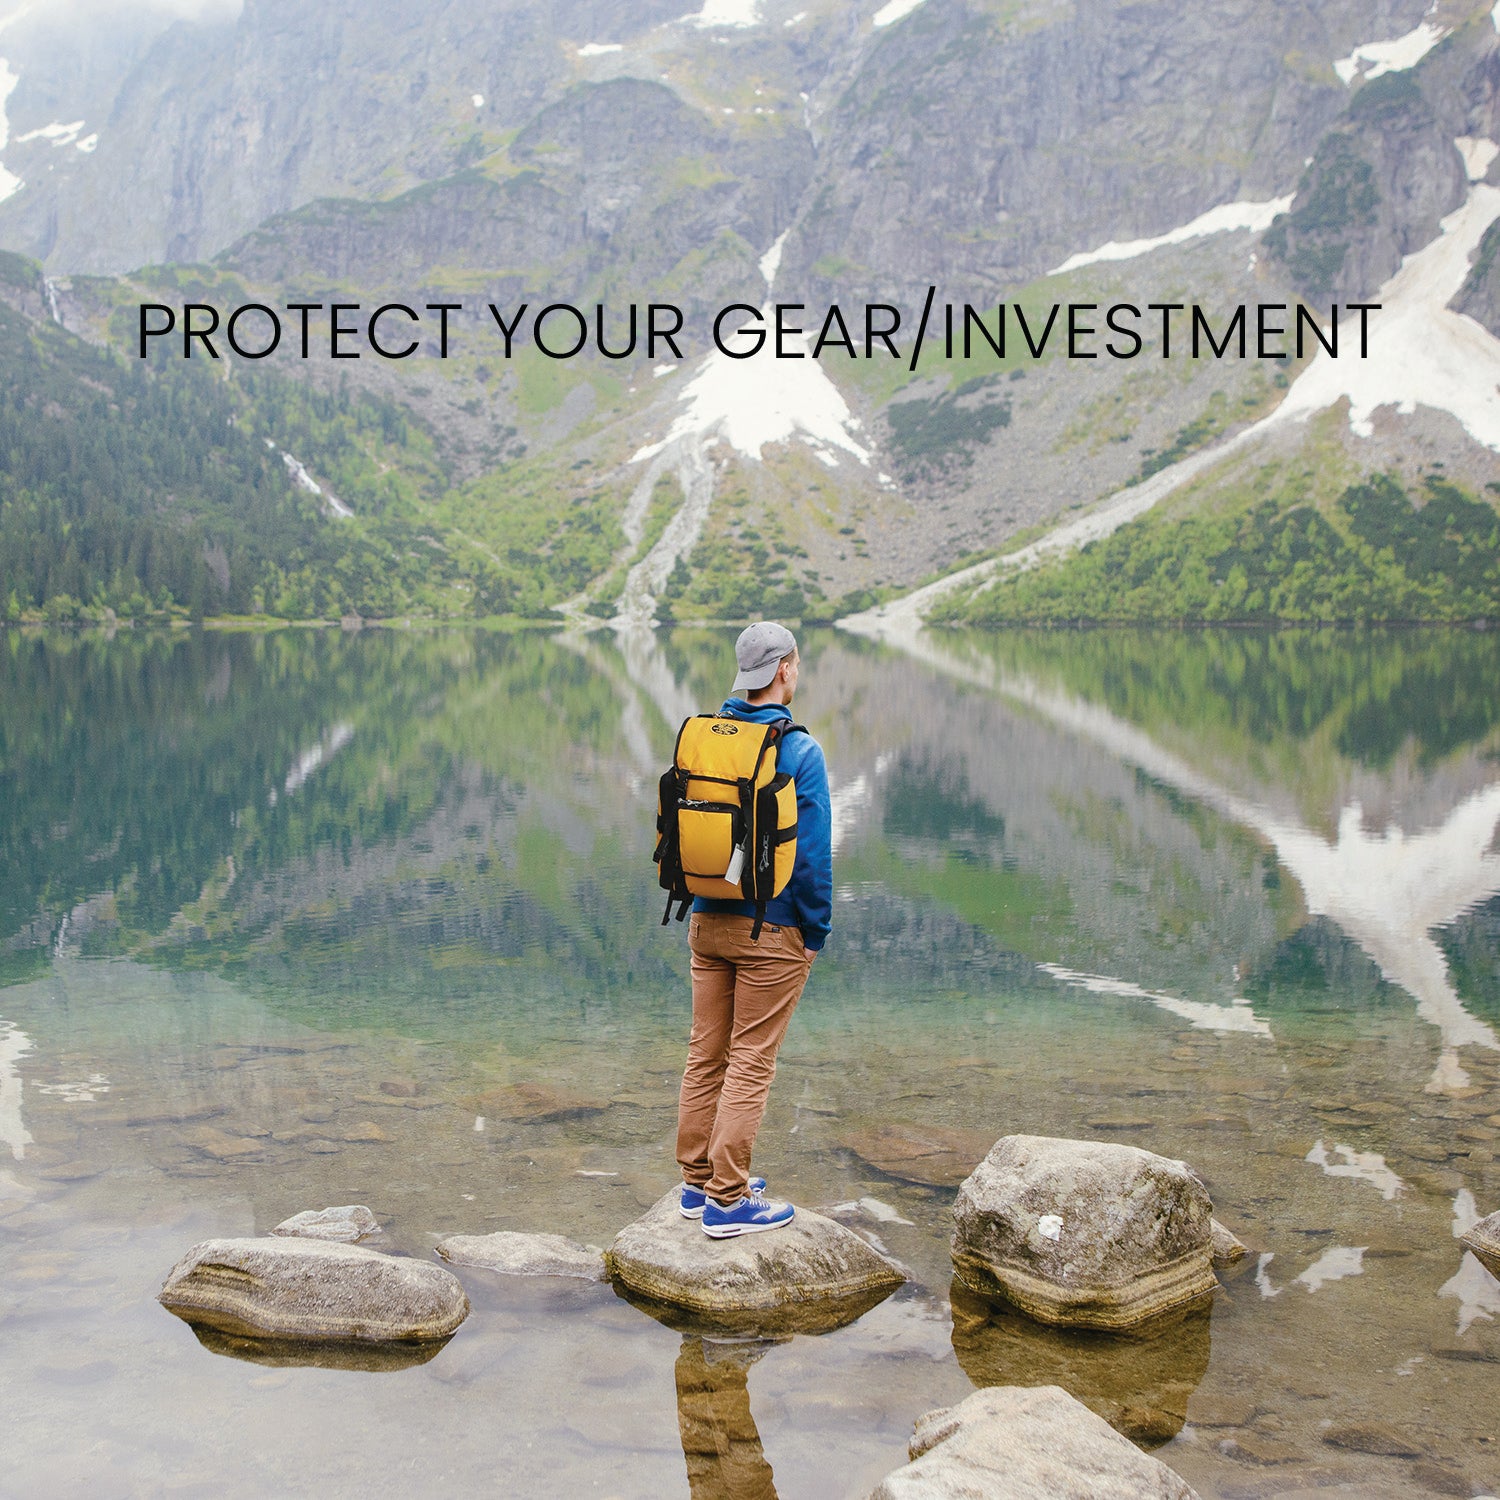 Protect your gear/investment